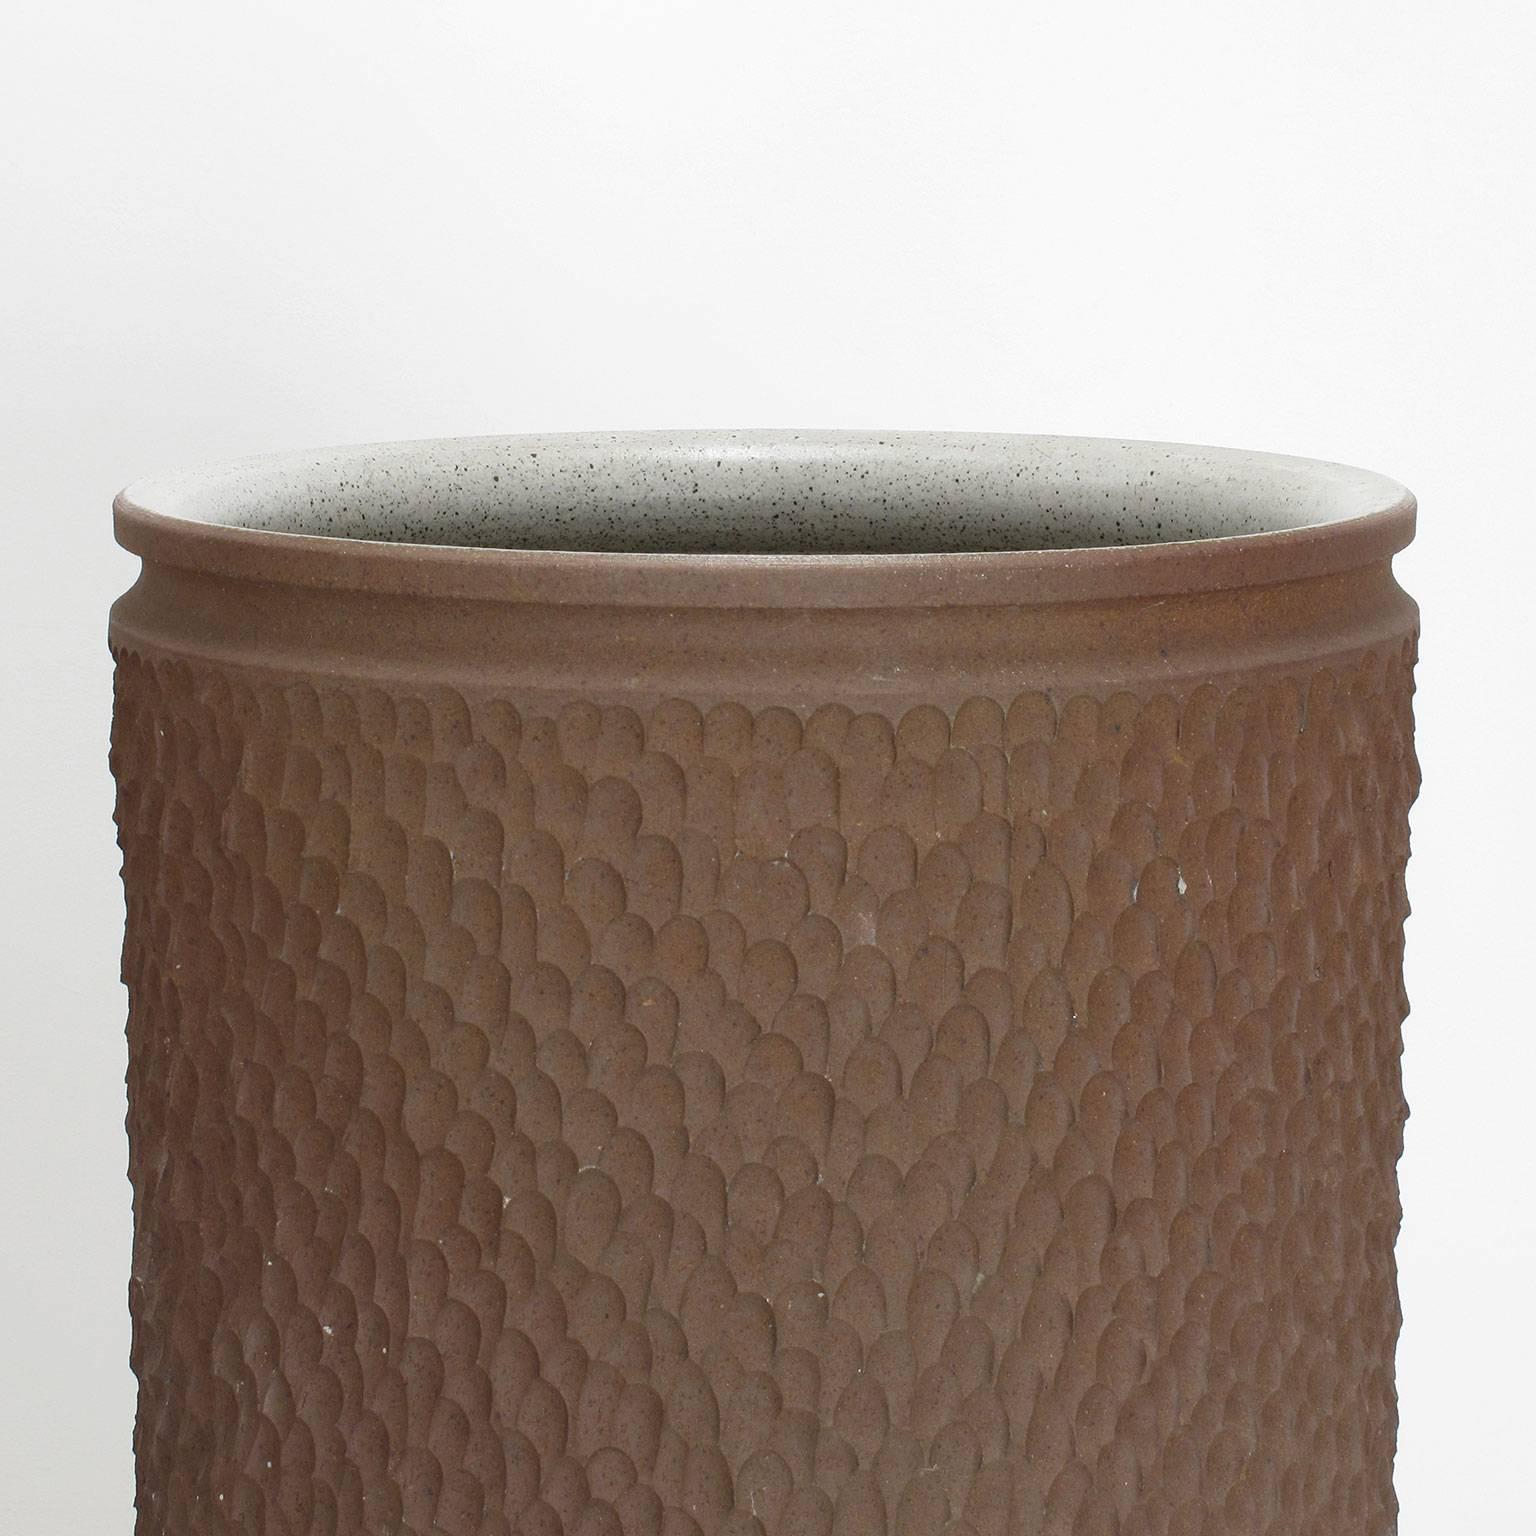 Hand-Carved David Cressey and Robert Maxwell 'Pebble' Design Ceramic Planter, 1970s For Sale